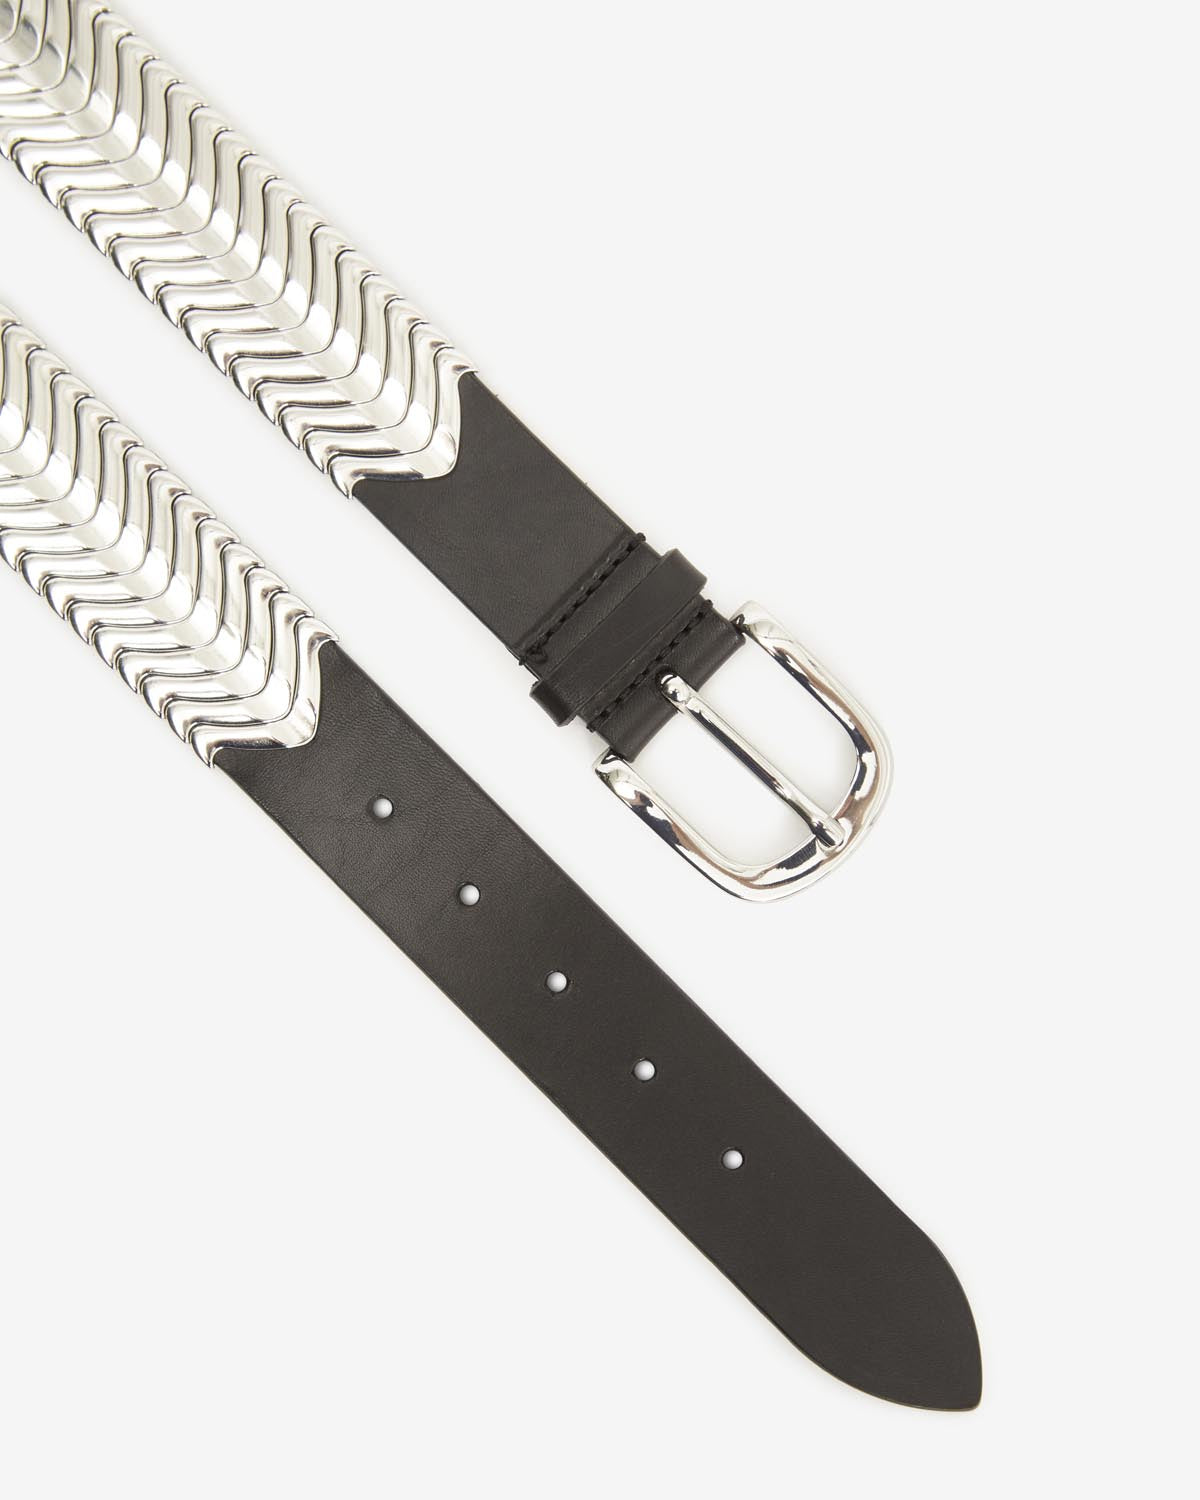 Tehora belt Woman Black and silver 7